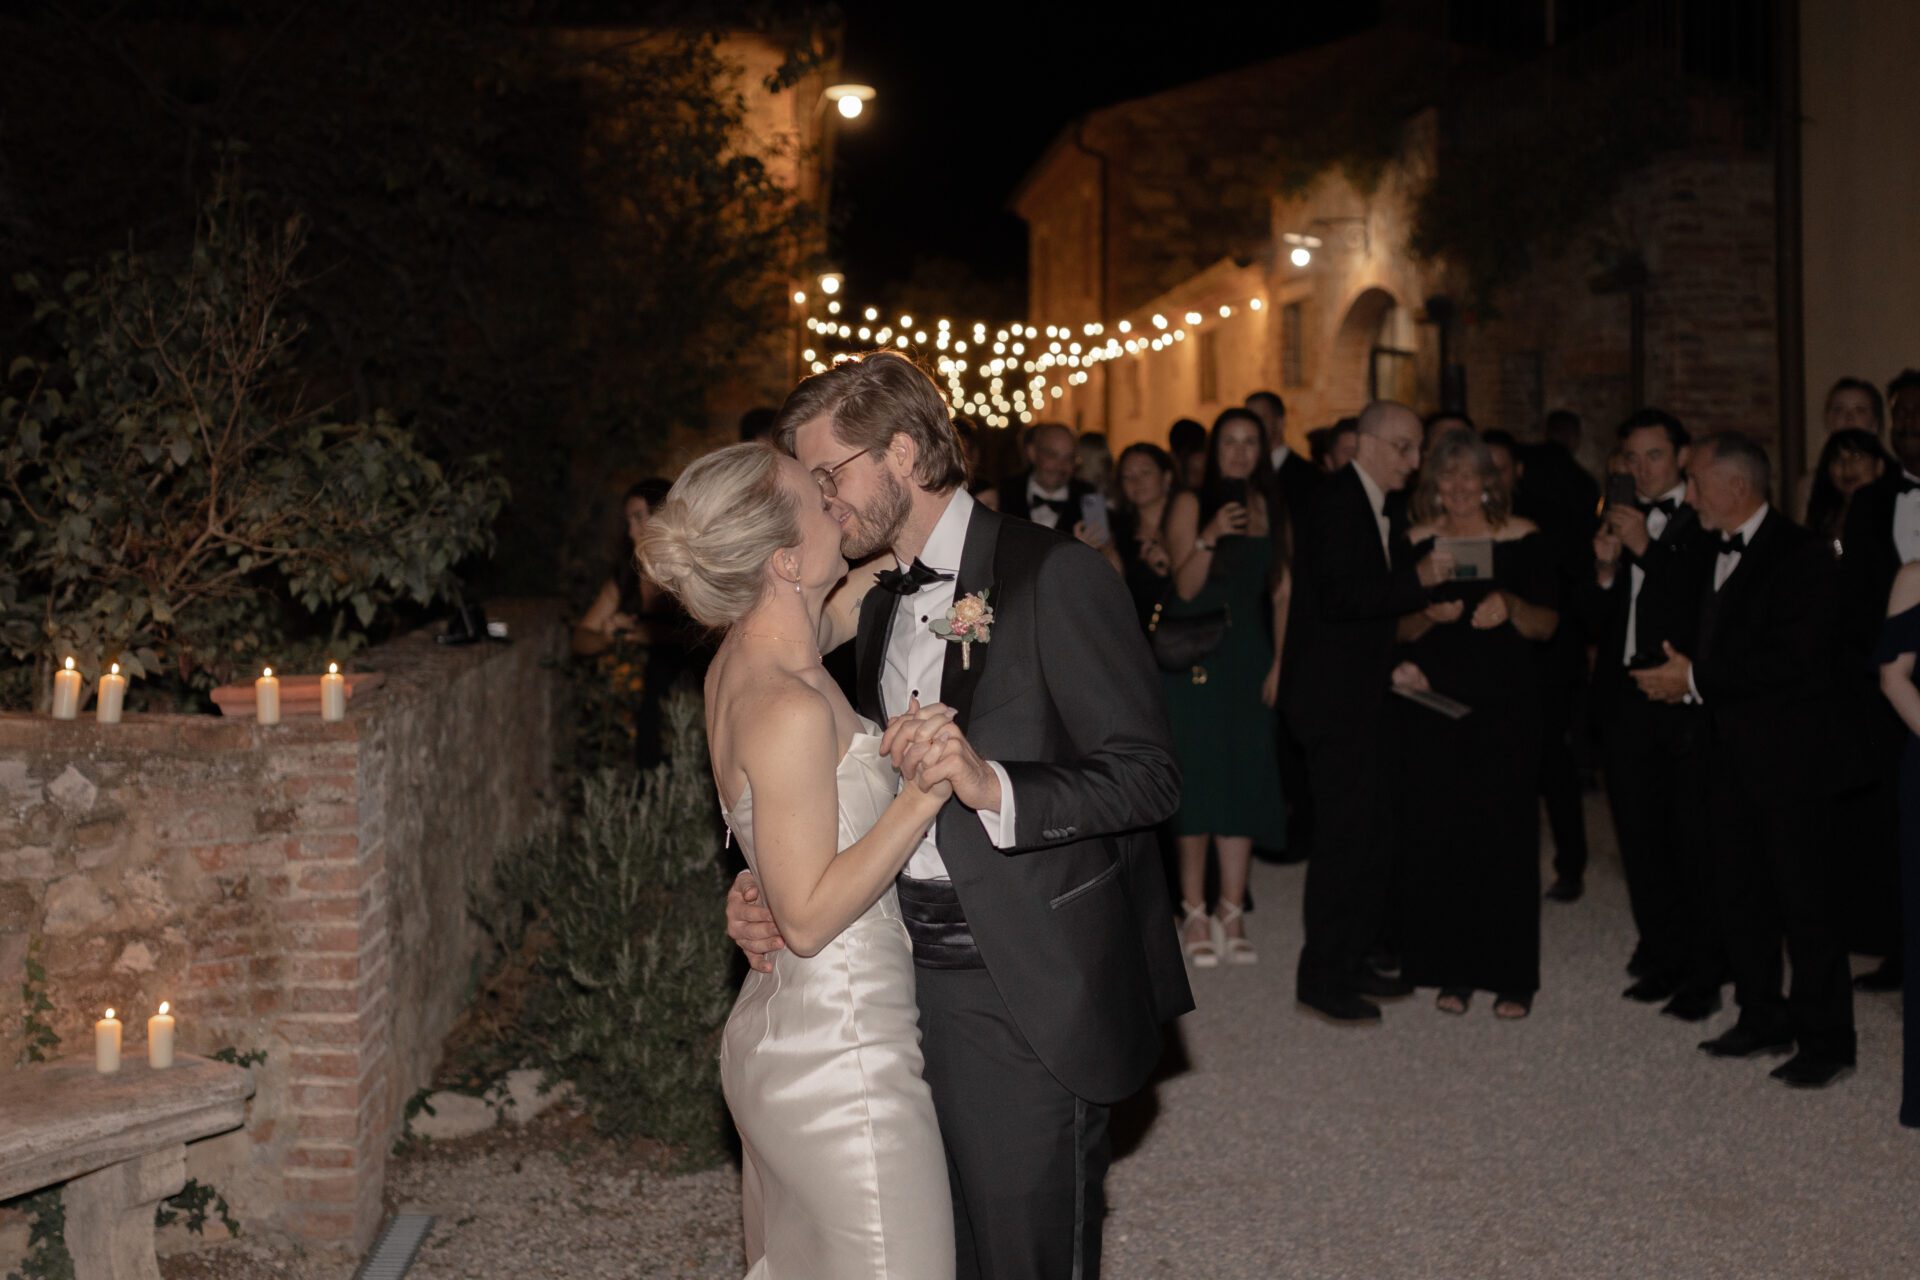 The bride and groom share their first dance in the Tuscan wedding venue courtyard surrounded by lights and candles